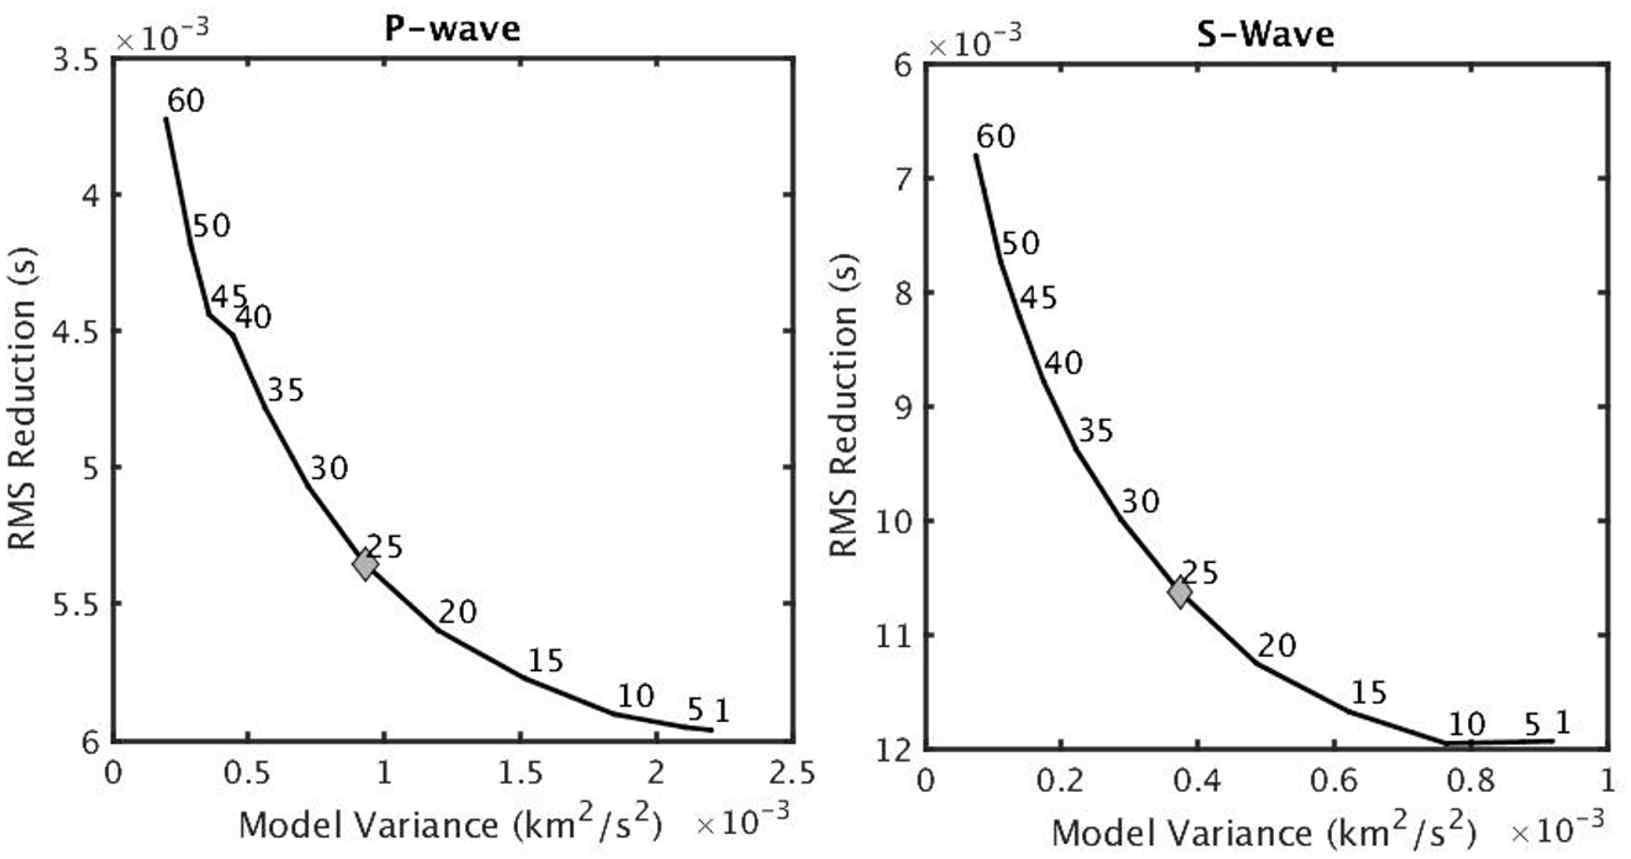 Trade-off curves used to select optimum damping values for tomographic inversions